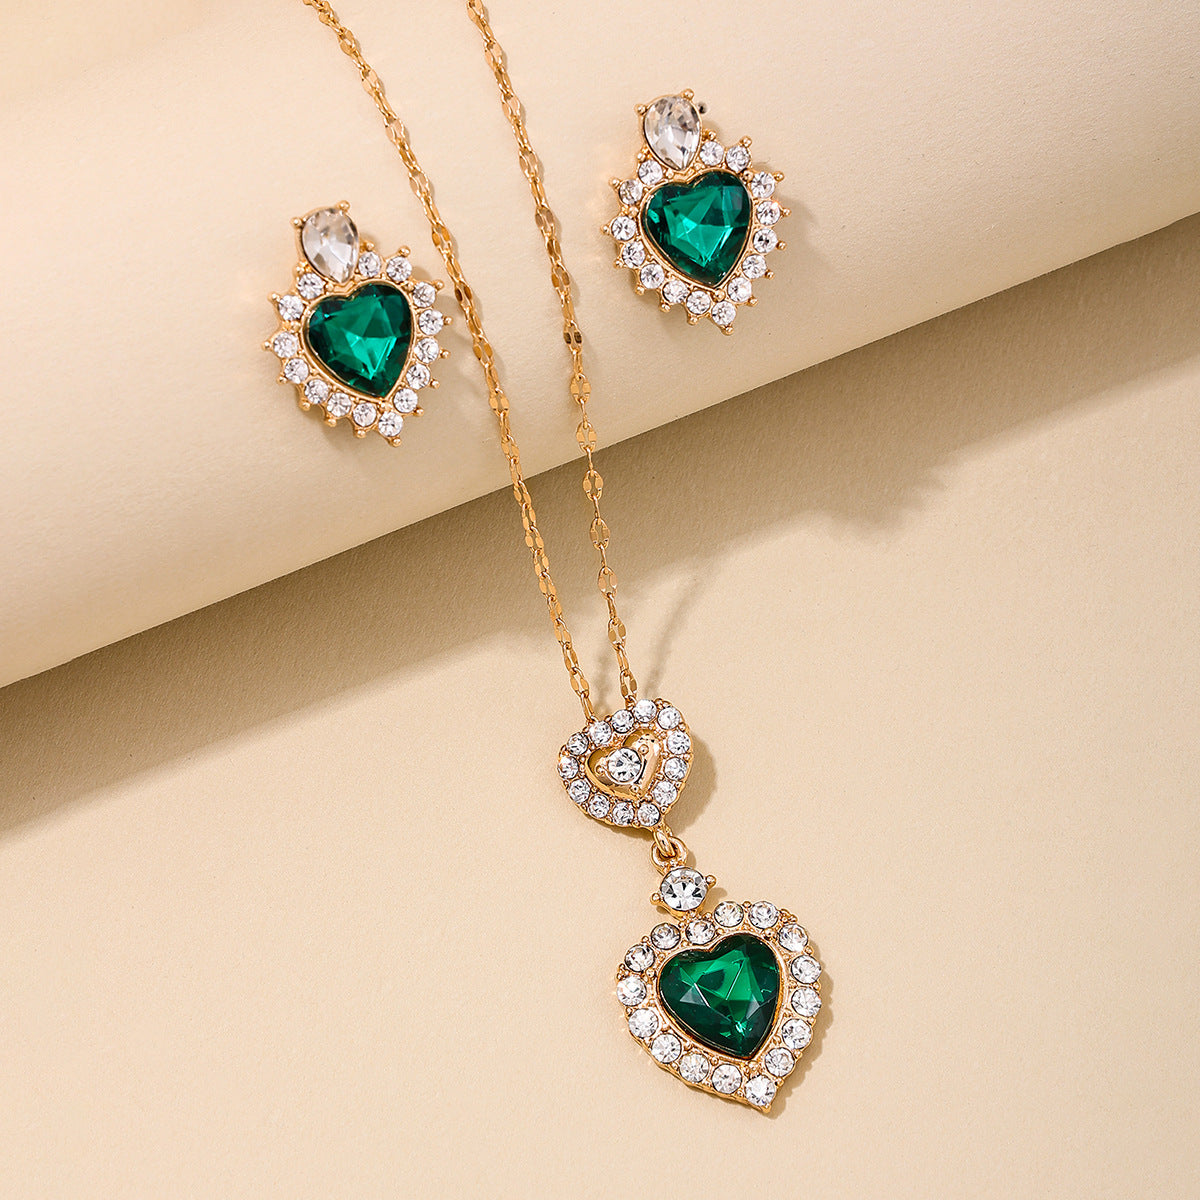 Green Heart Design Metal Jewelry Set for Women with Earrings and Necklace